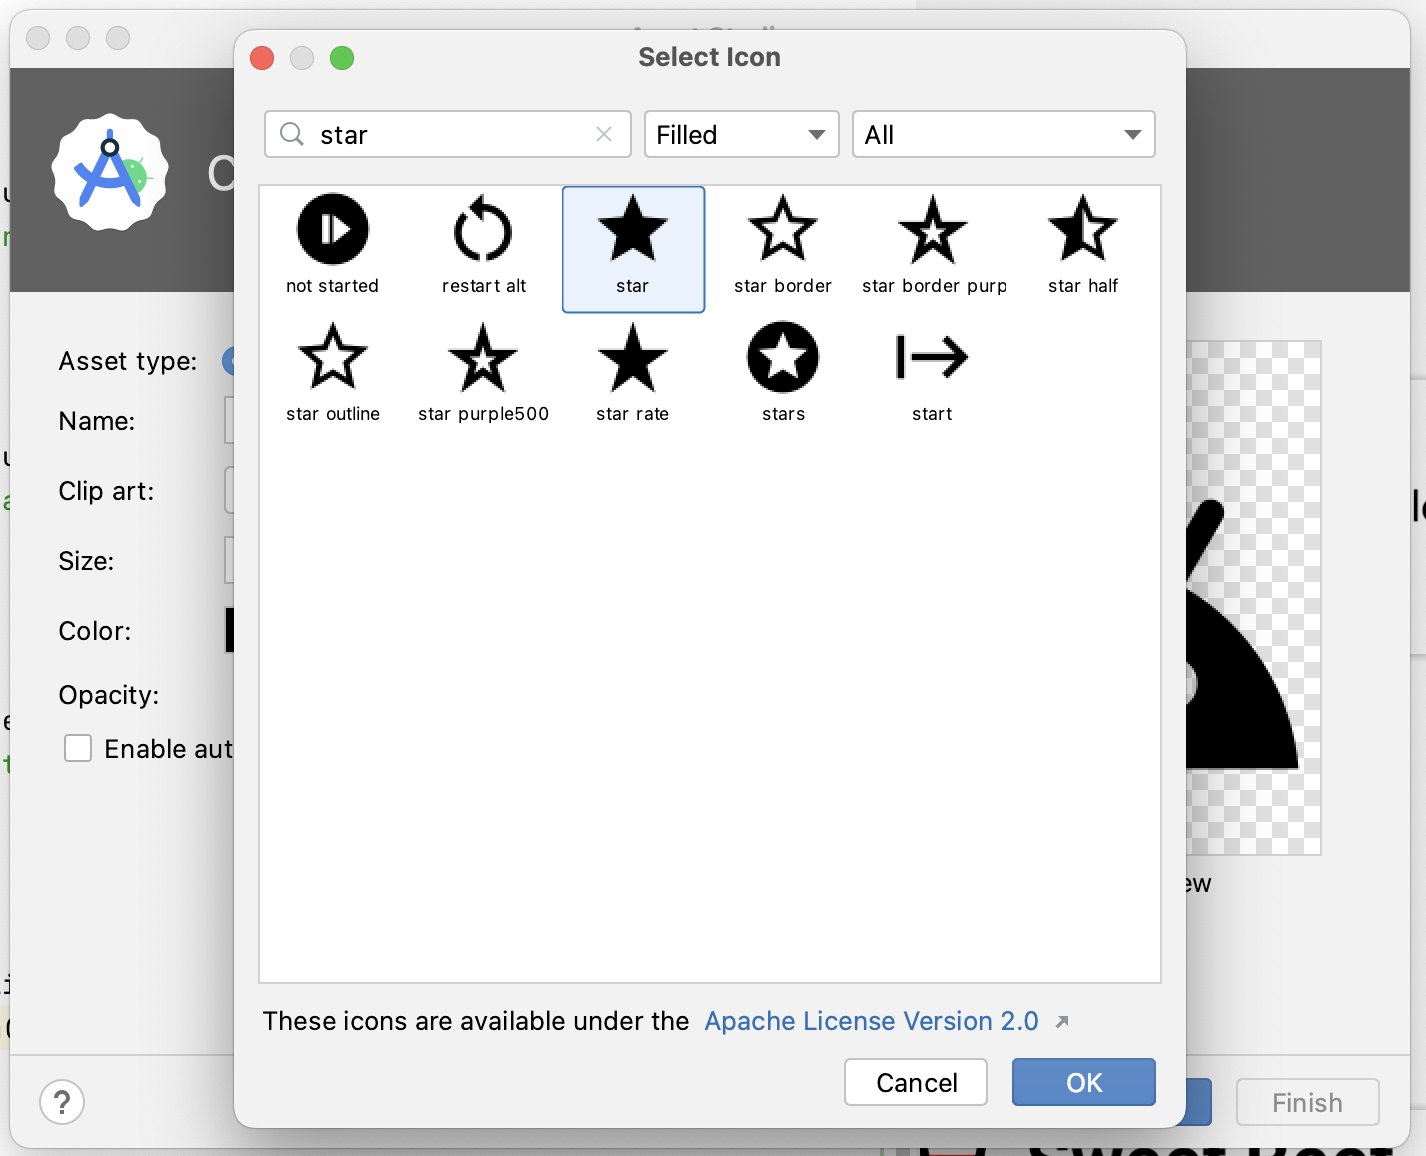 Select icon dialog with start icon selected 